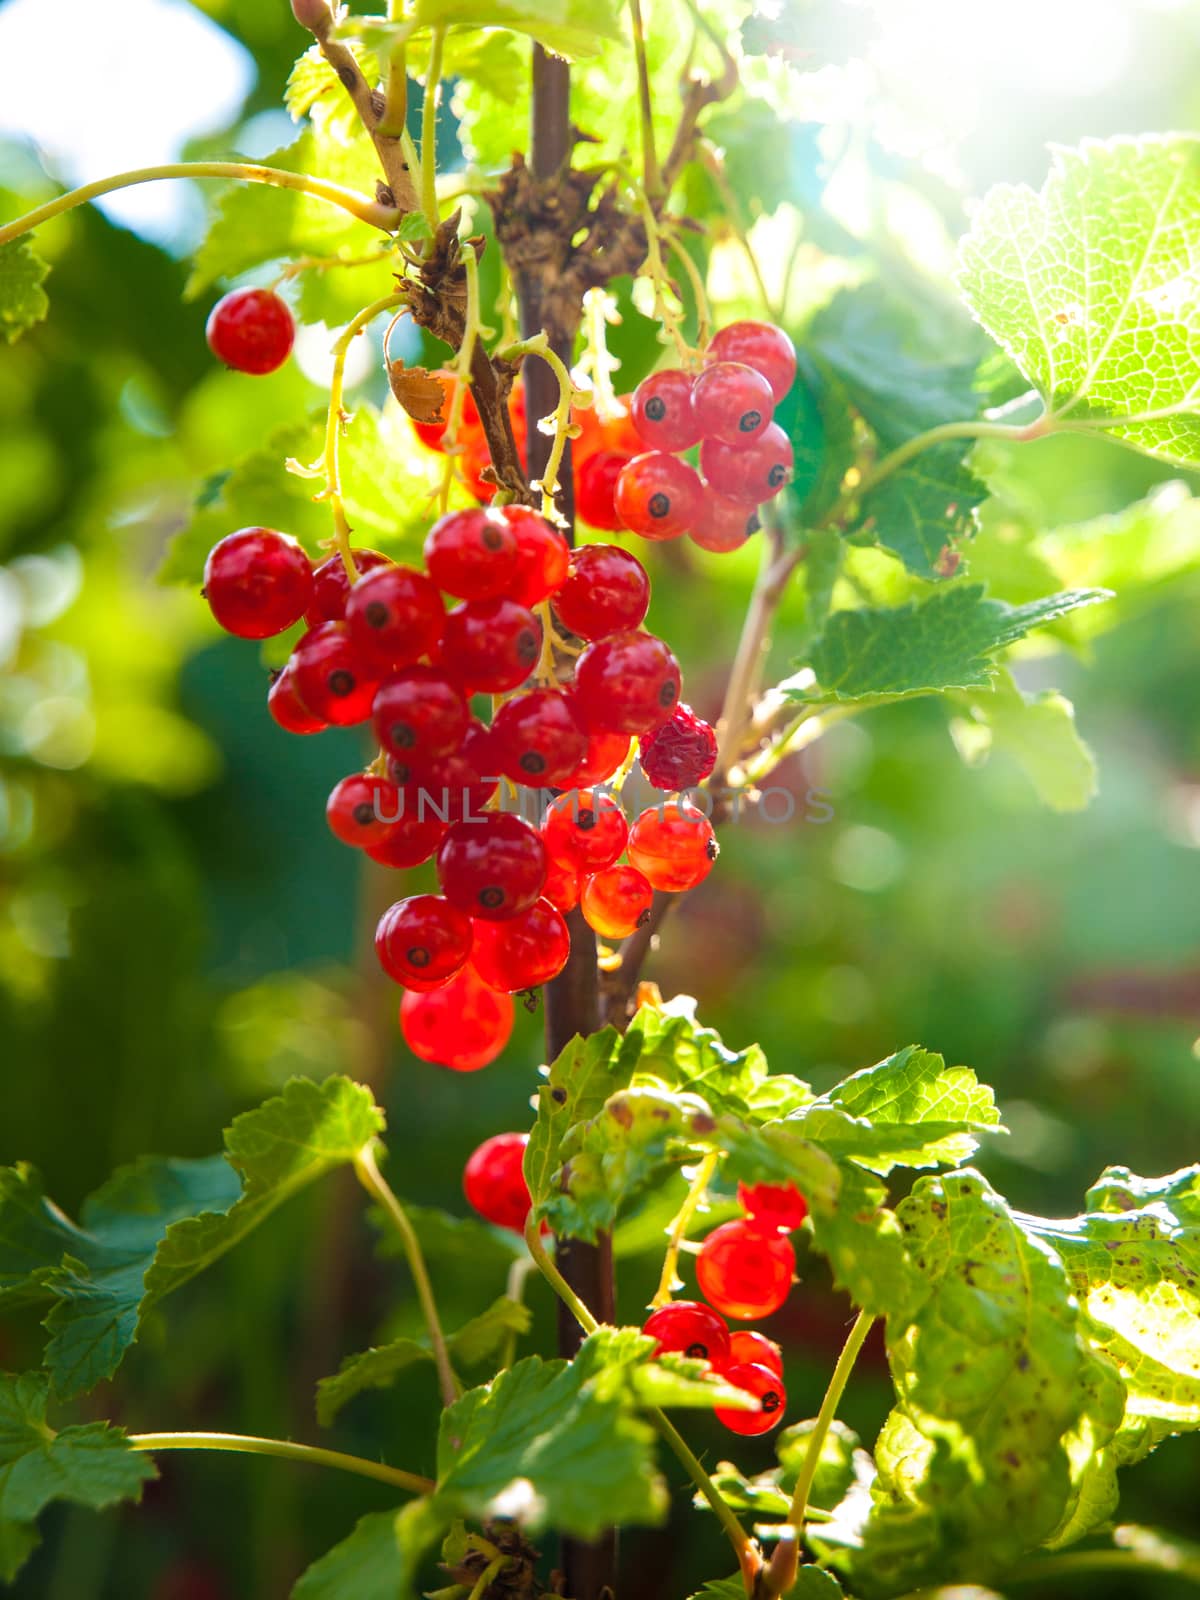 Red currant berries on the branch. Summer garden ripenning crop by pyty